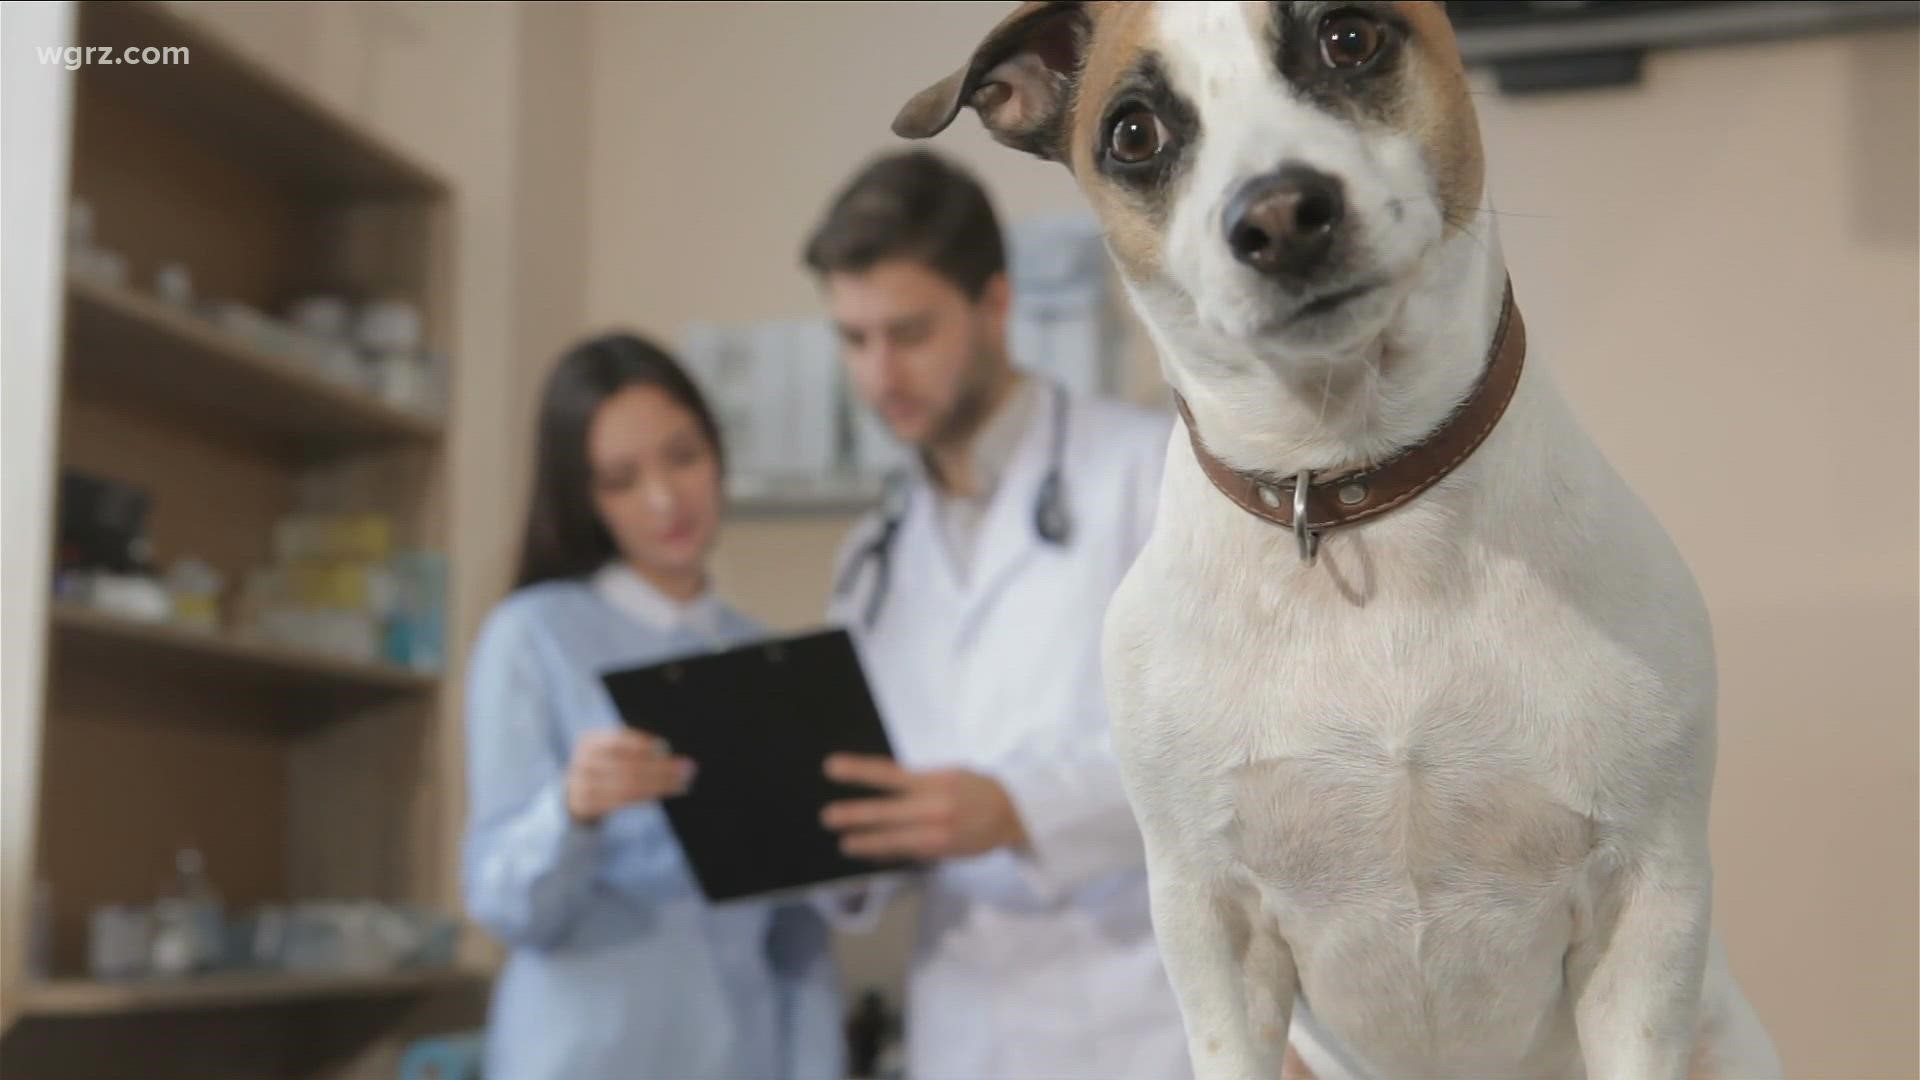 If you are having a tough time getting an appointment for your pet, you are not alone. Animal hospitals across the country are reporting limited space and staff.